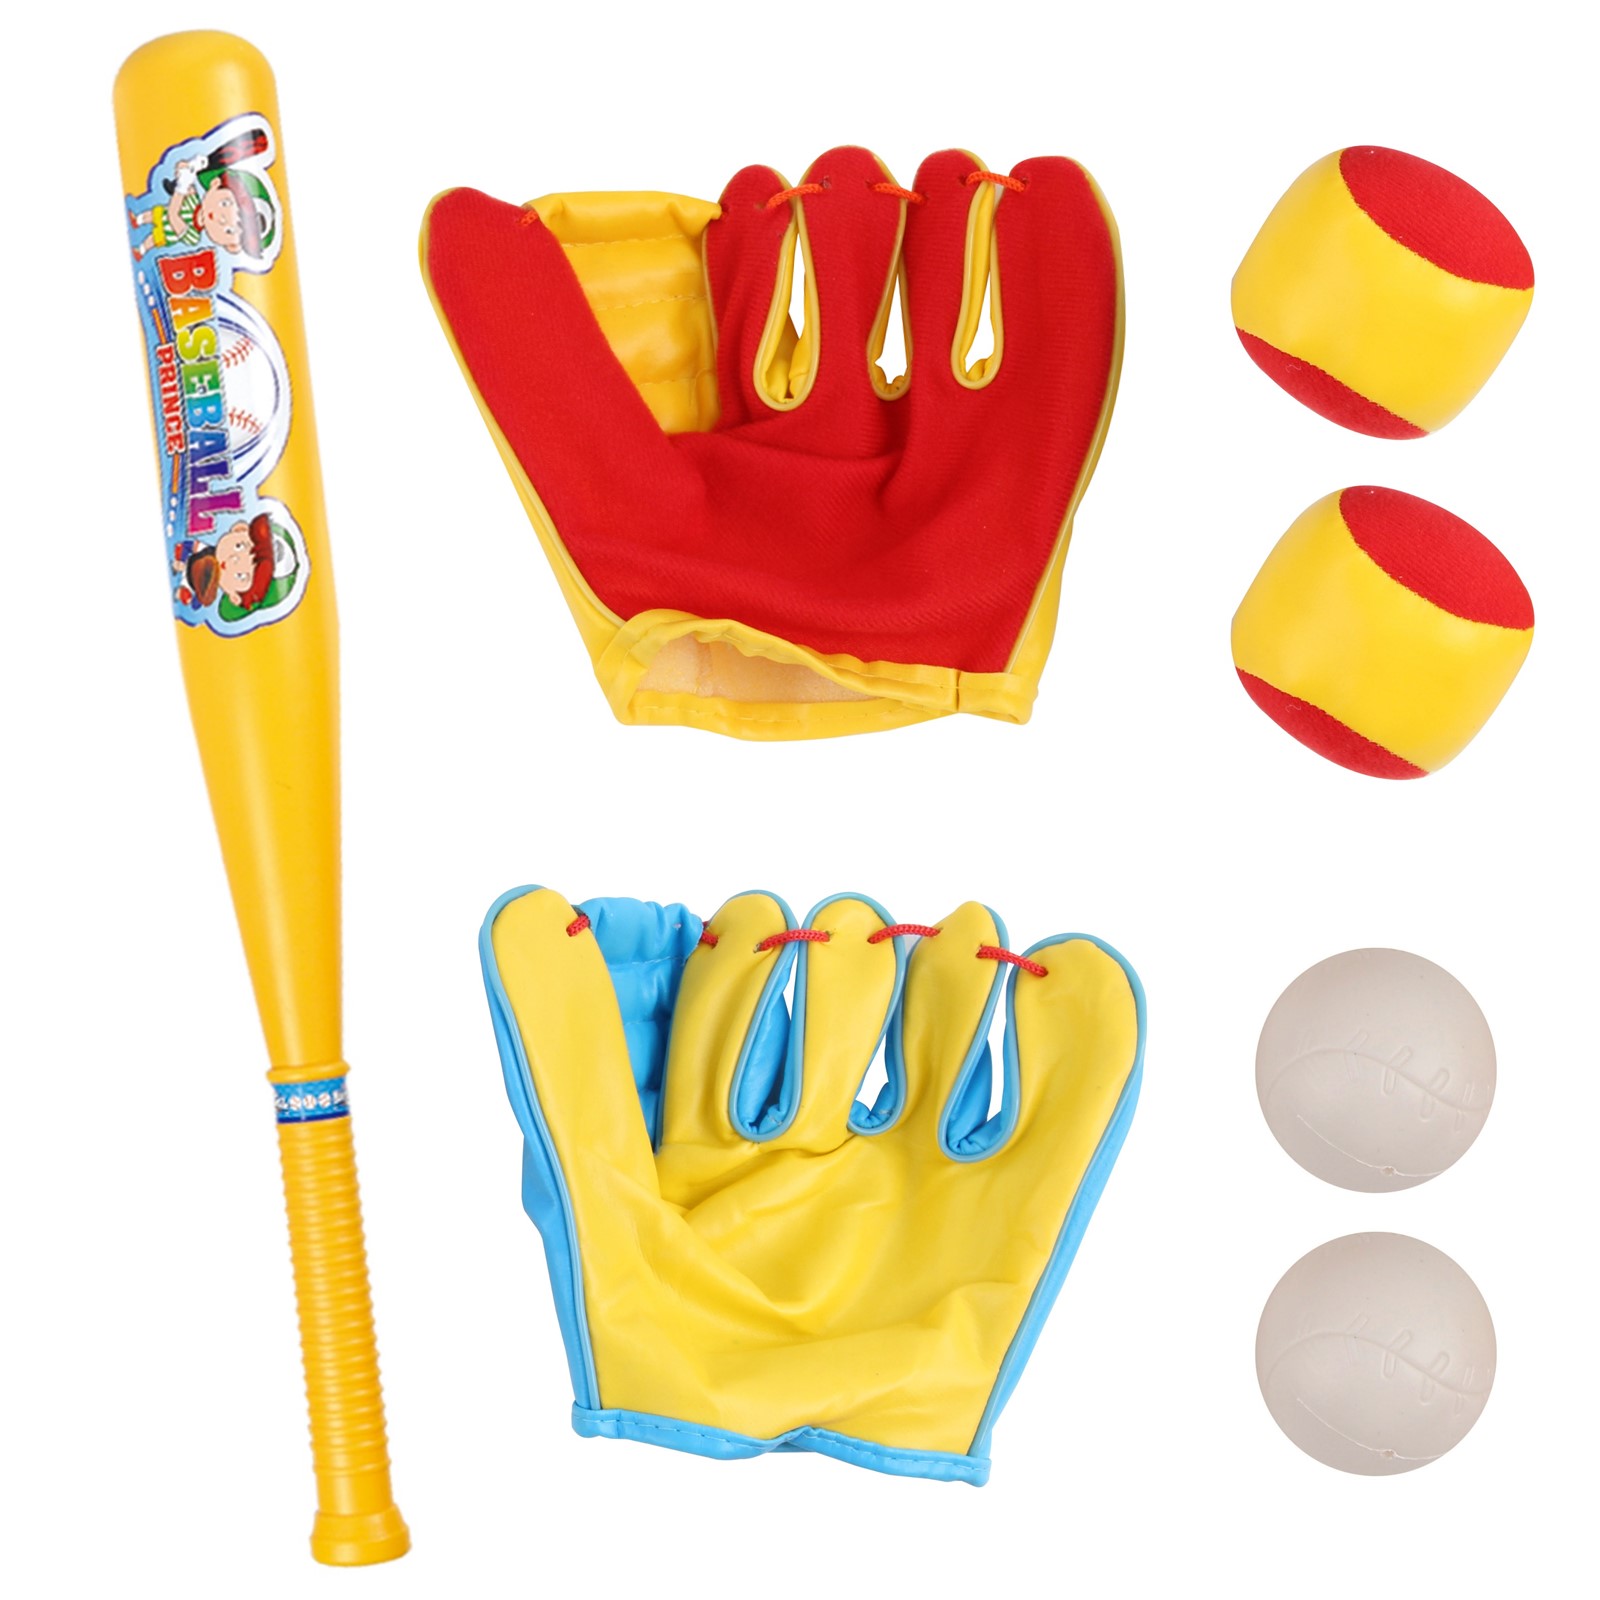 Baseball Set For Toddlers And Kids Practice Game Includes 1 Bat 2 Mitts 4 Balls Perfect Gift For Children Boys Girls To Improve Batting Skills Sports Toys Tee Game T-Ball